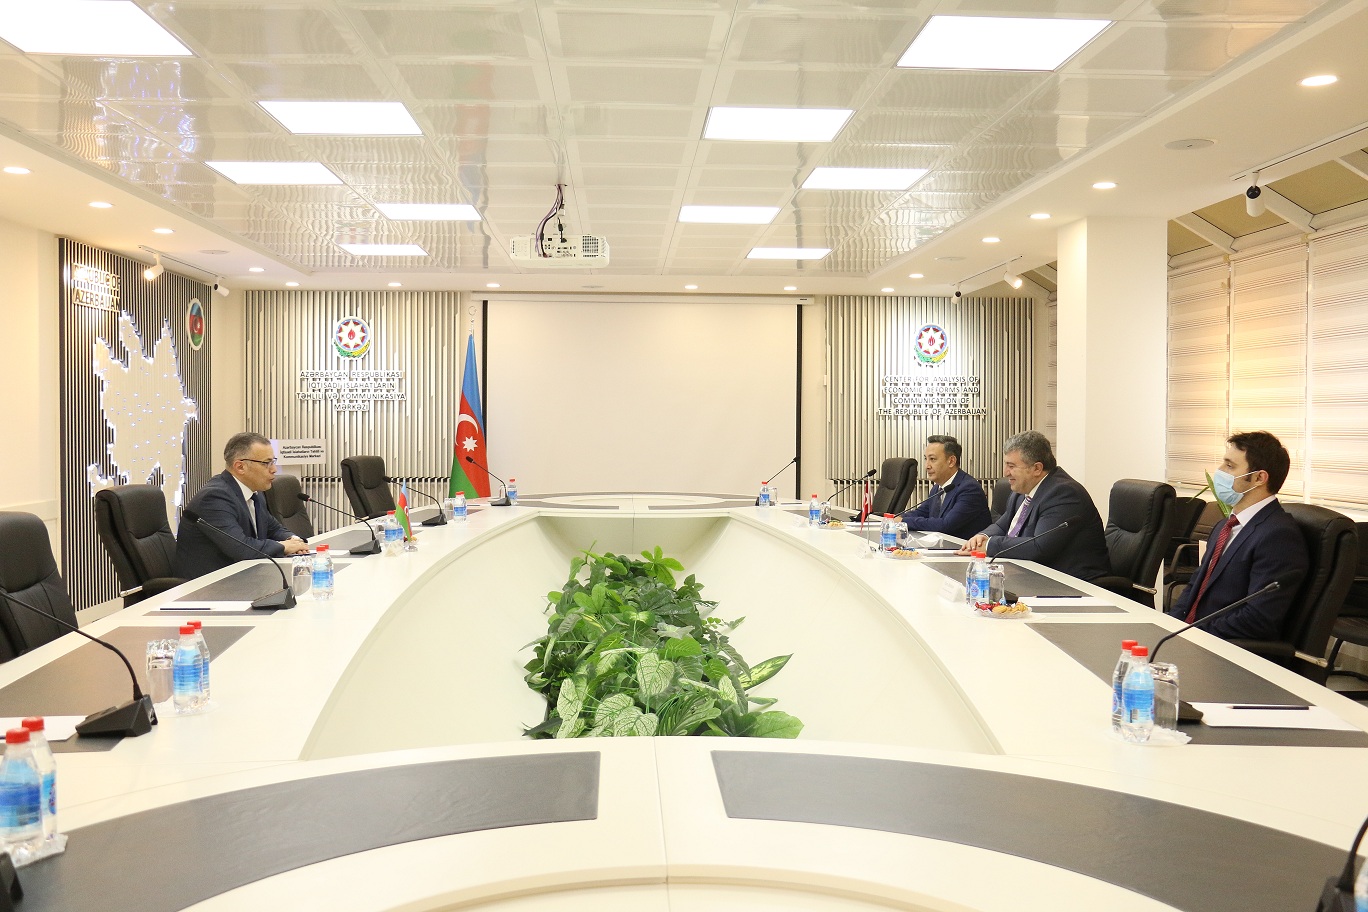 Turkey and Azerbaijan will cooperate in the development of SMEs